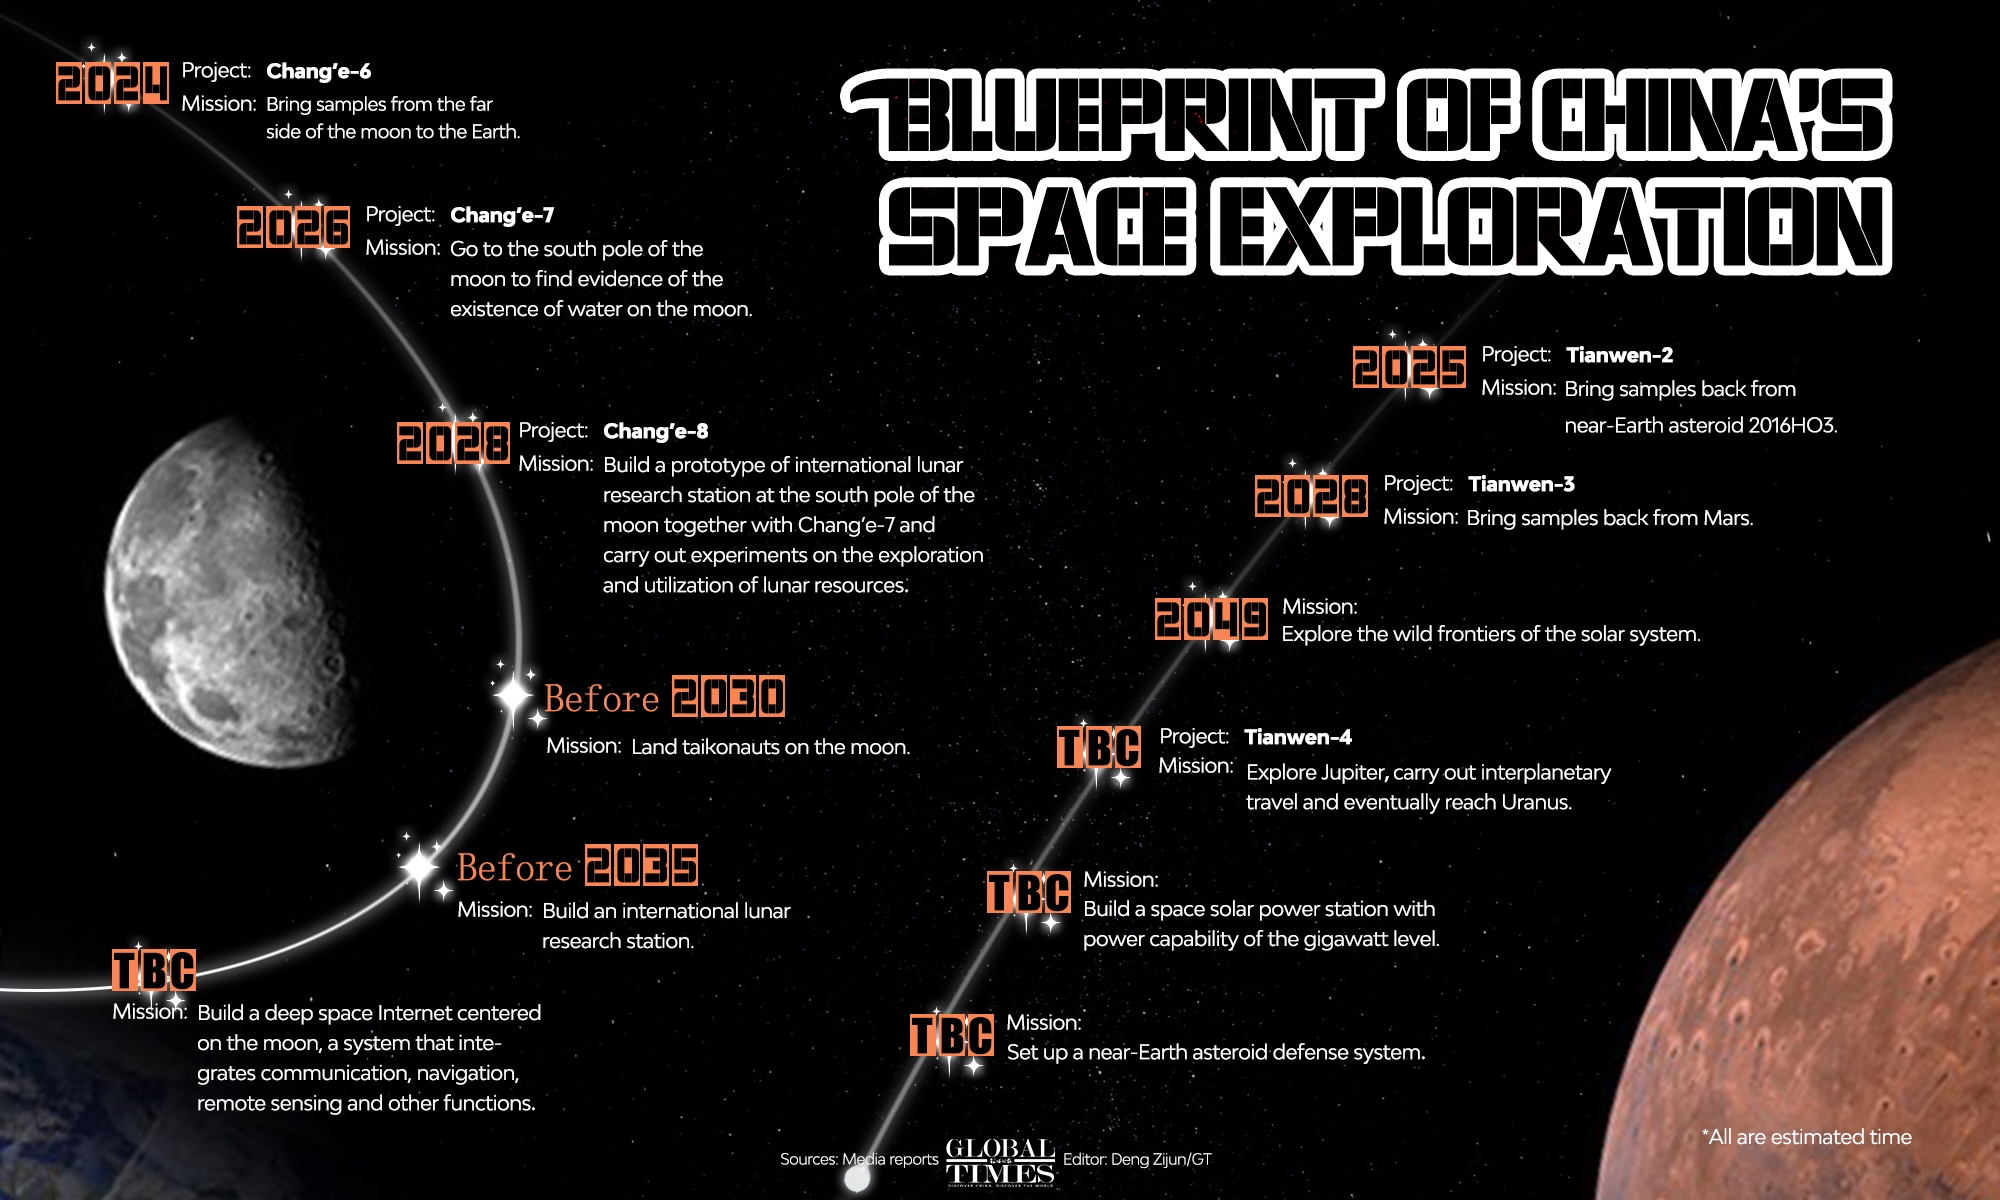 Blueprint of China's space exploration. Graphic: GT